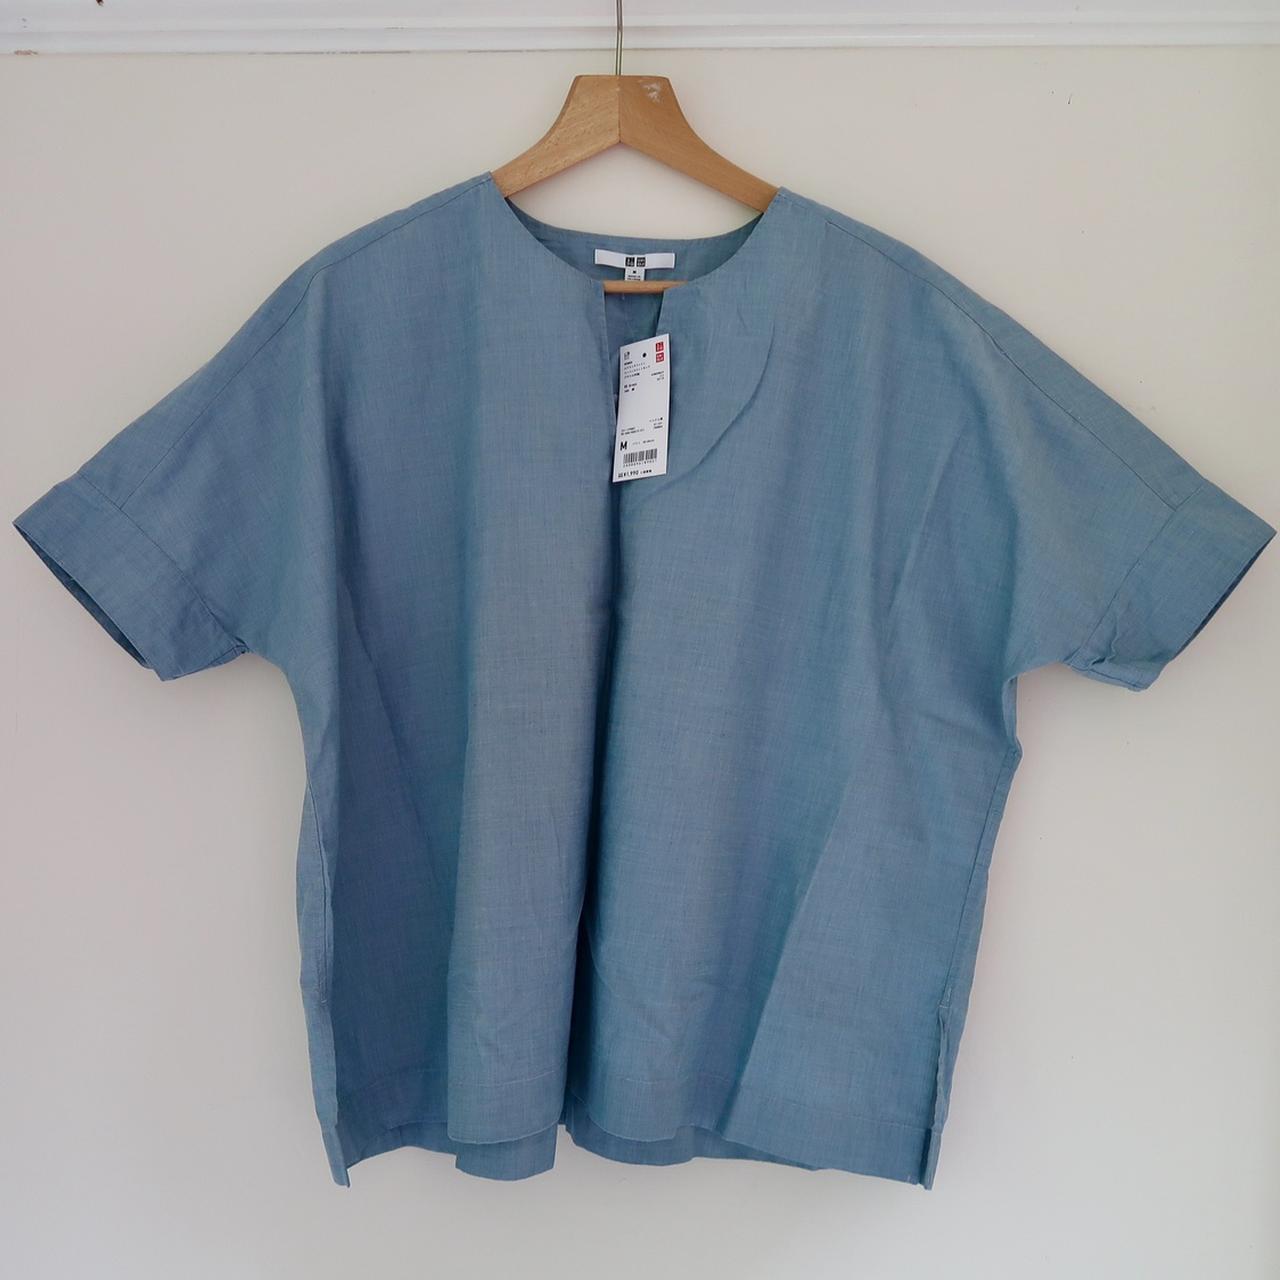 UNIQLO OVERSIZED BLUE TOP | BRAND NEW WITH TAGS |... - Depop